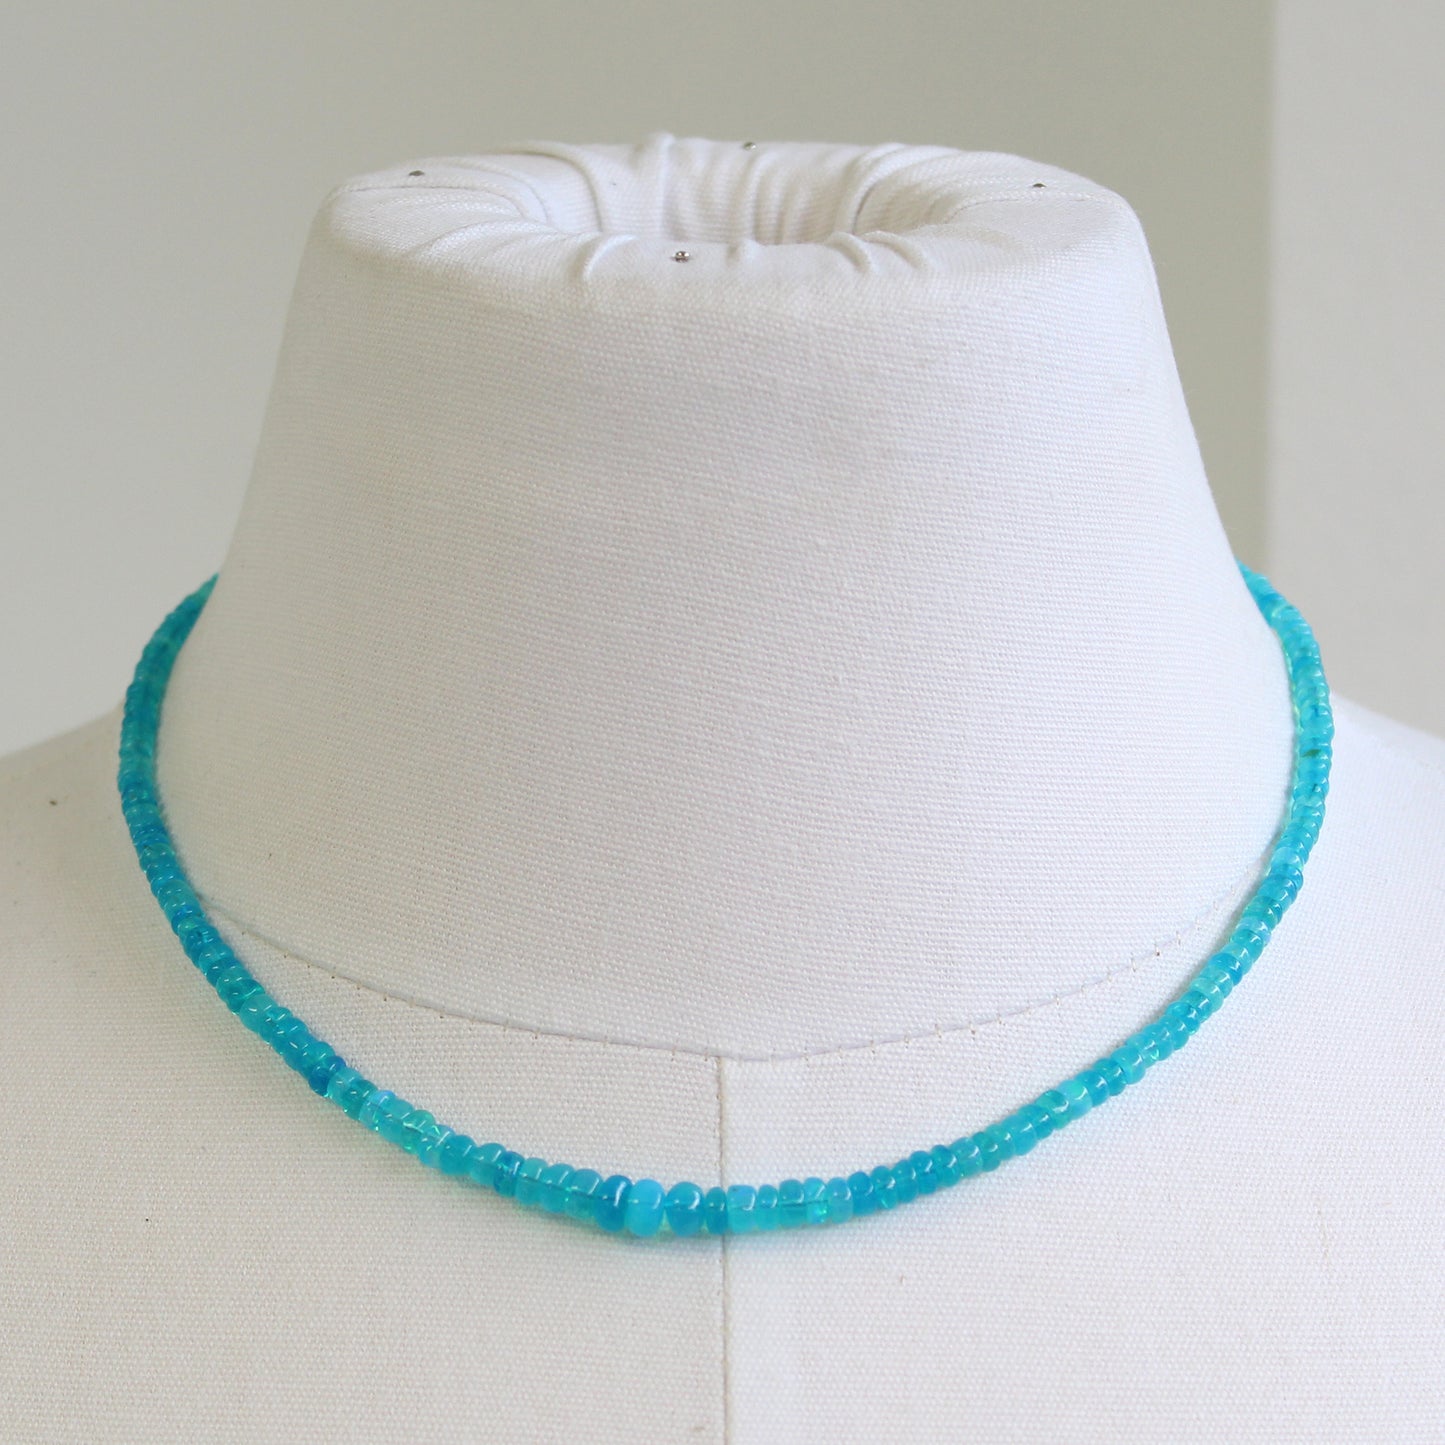 Blue Opal Necklace, 16.5 Inches Long